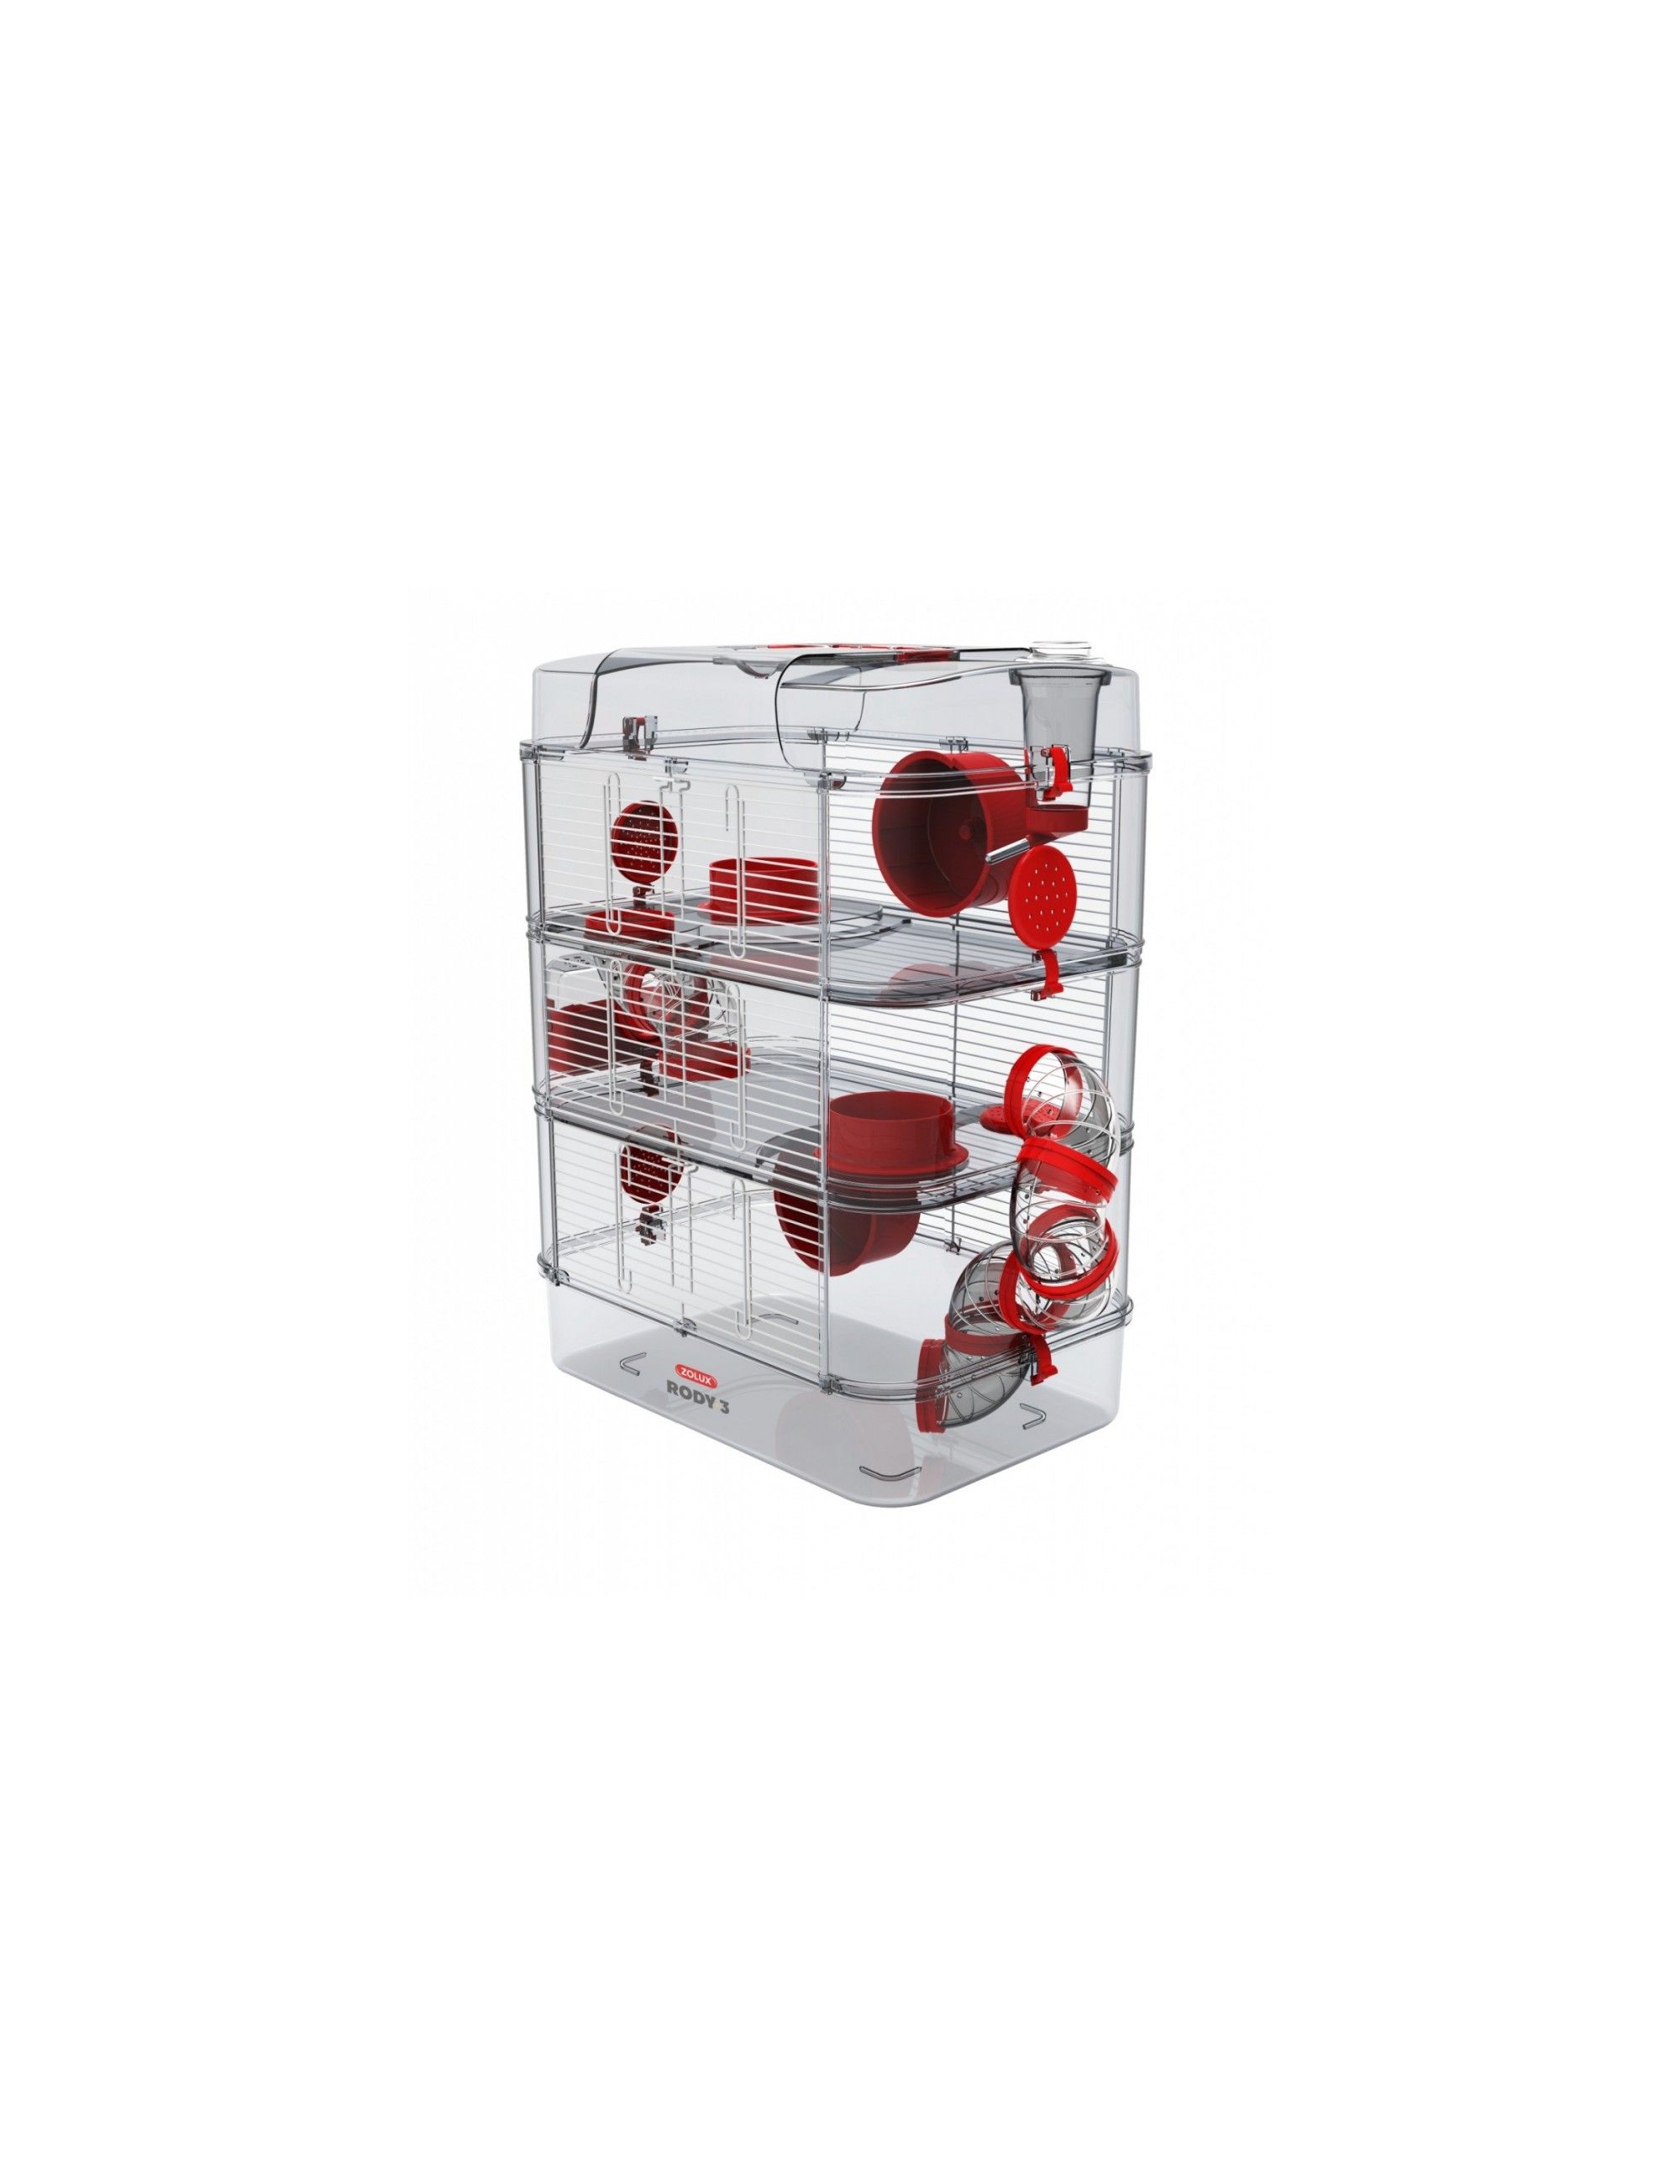 ZOLUX - “Rody 3 Trio” cage for small rodents